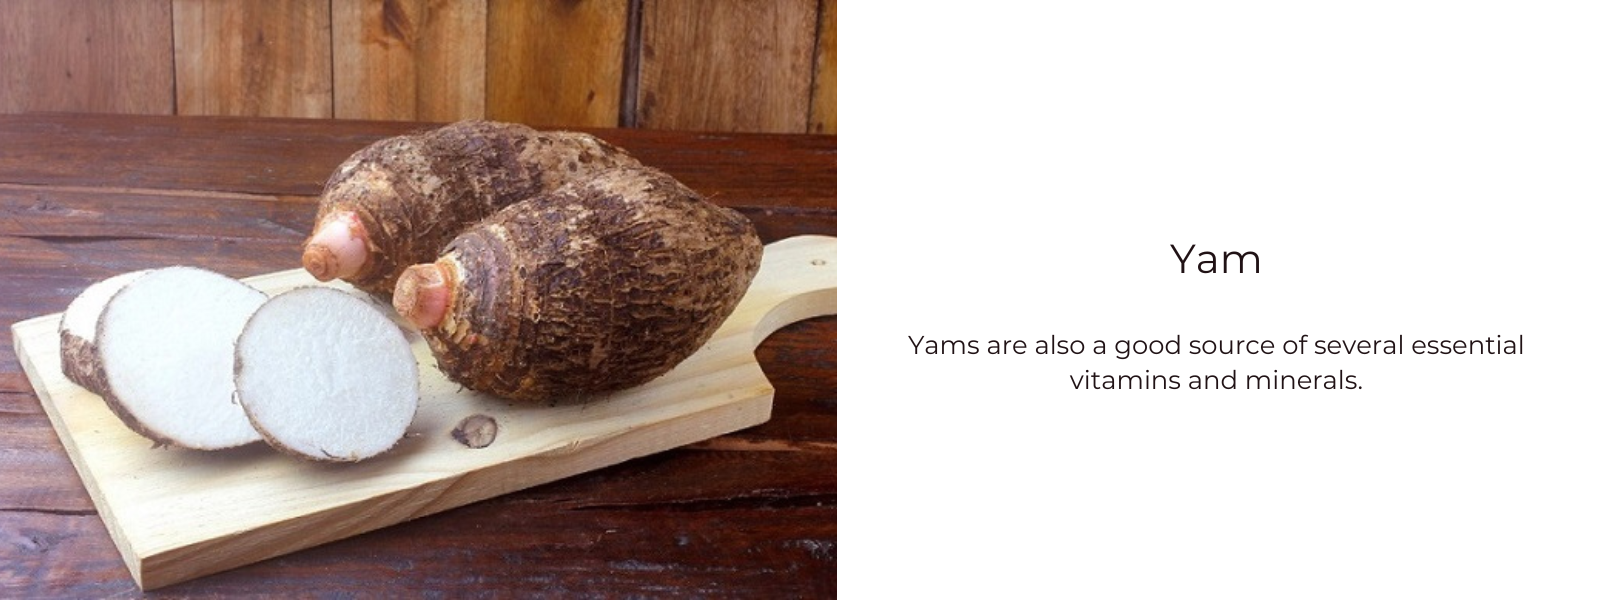 West African Yams Information and Facts